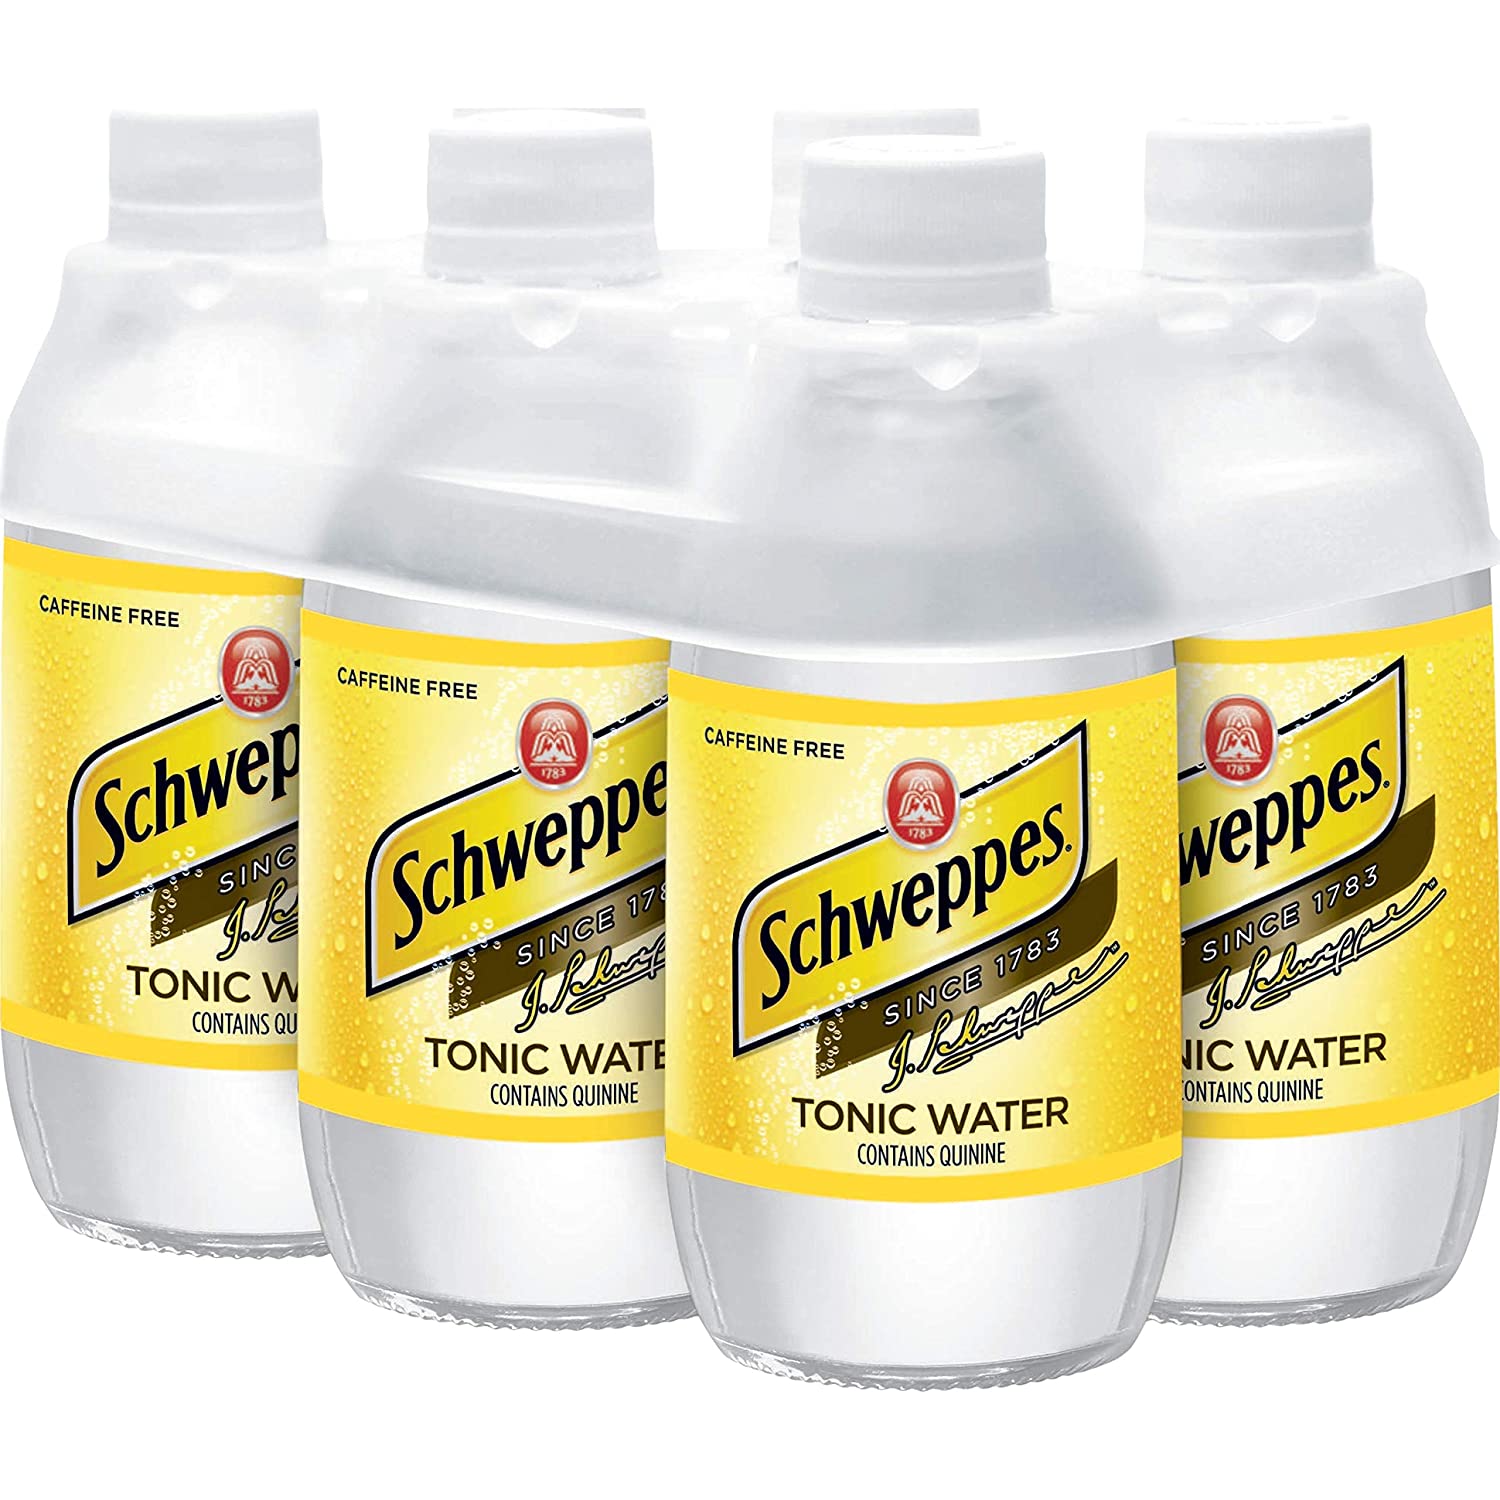 Schweppes Tonic Water 10 oz Glass Bottle Pack of 24